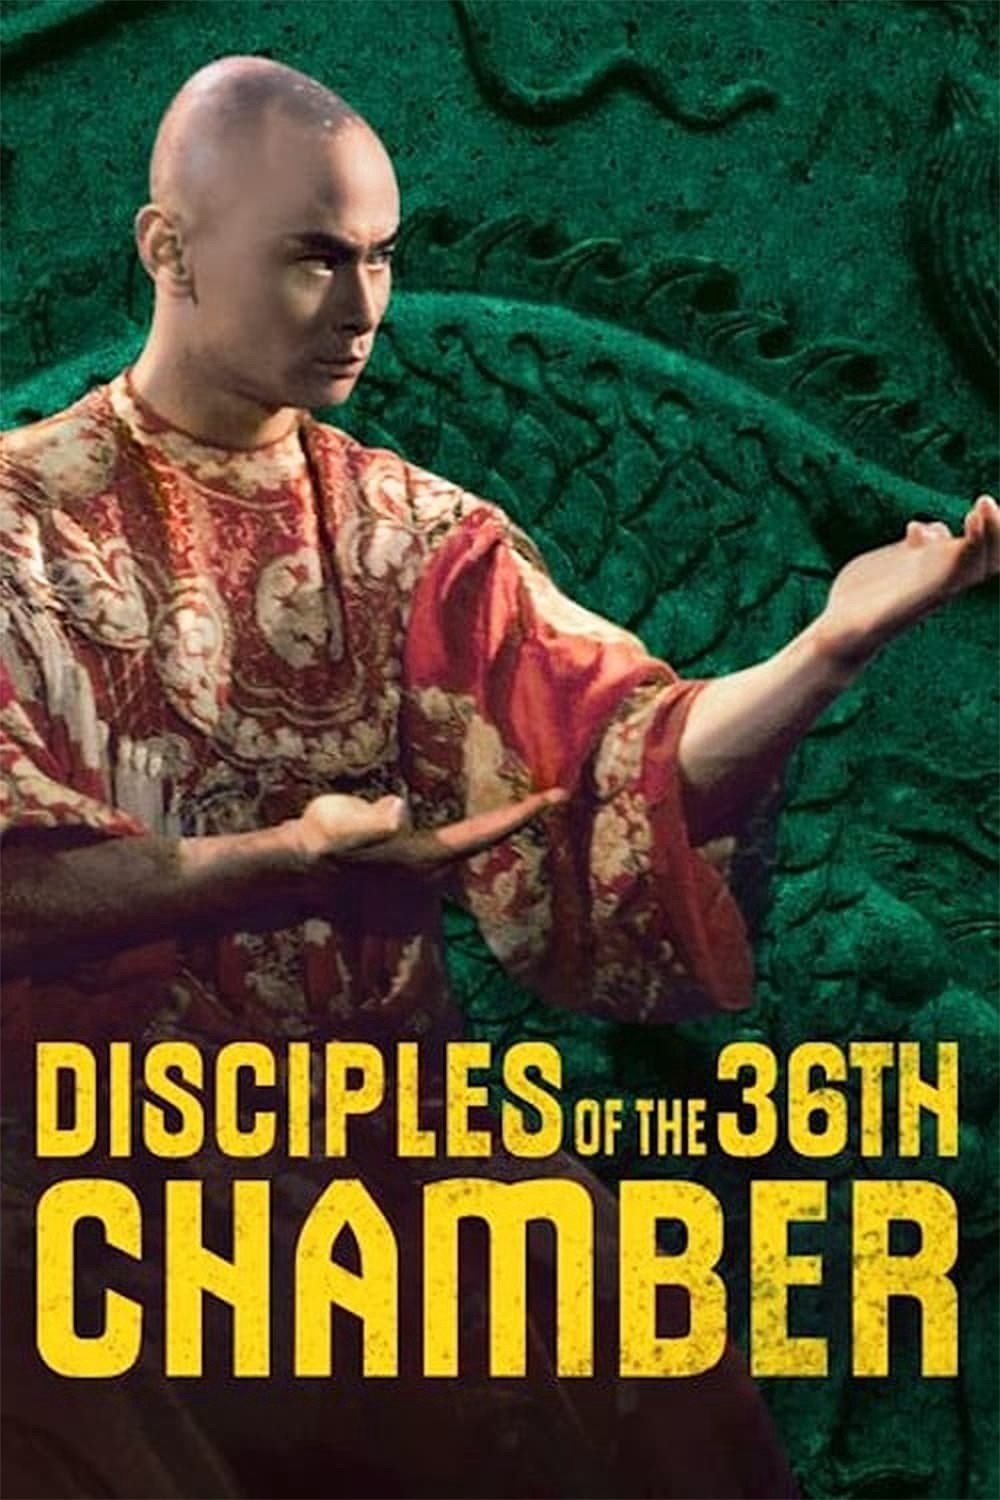 Disciples of the 36th Chamber - Disciples of the 36th Chamber (1985)